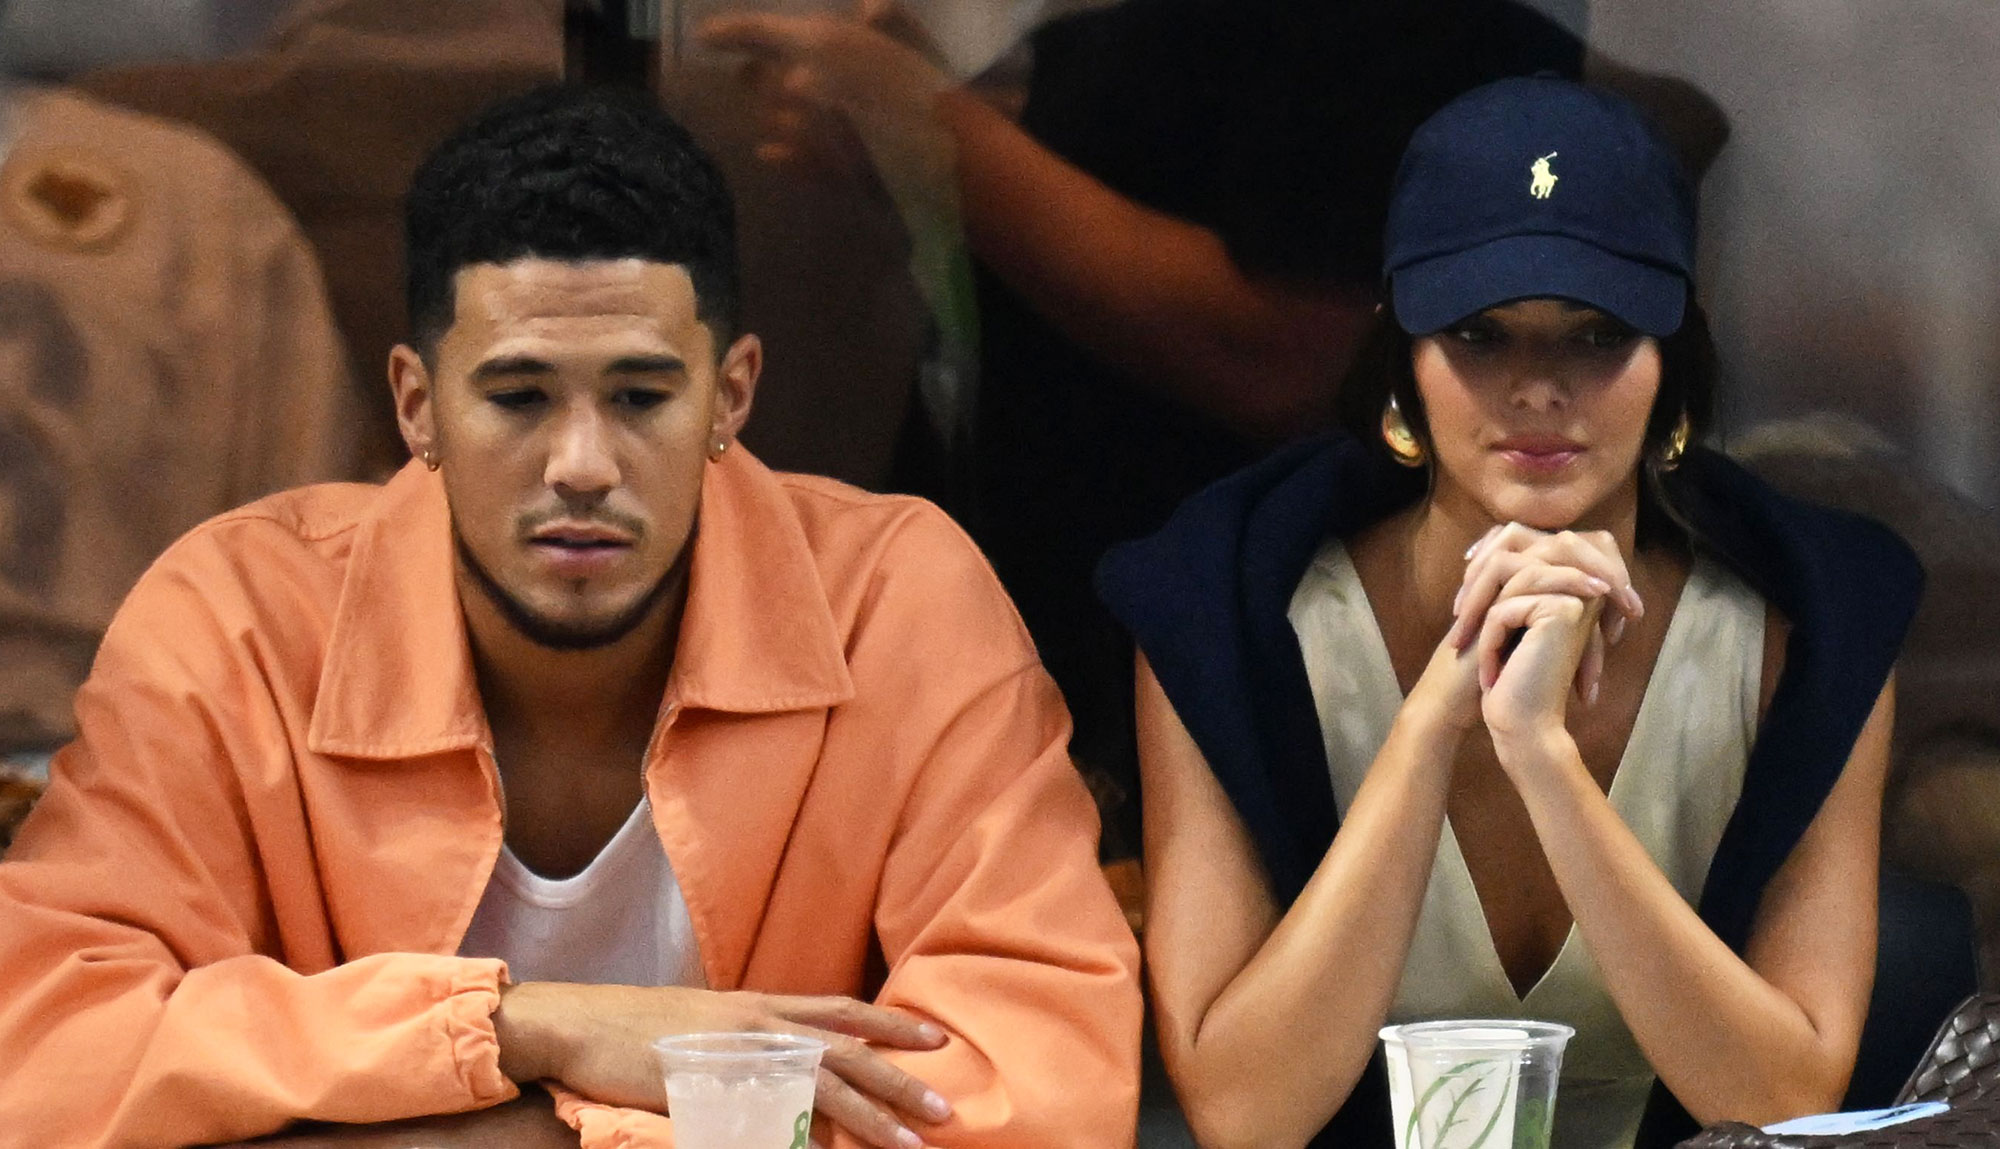 Kendall Jenner adds more fuel to the Devin Booker dating rumors